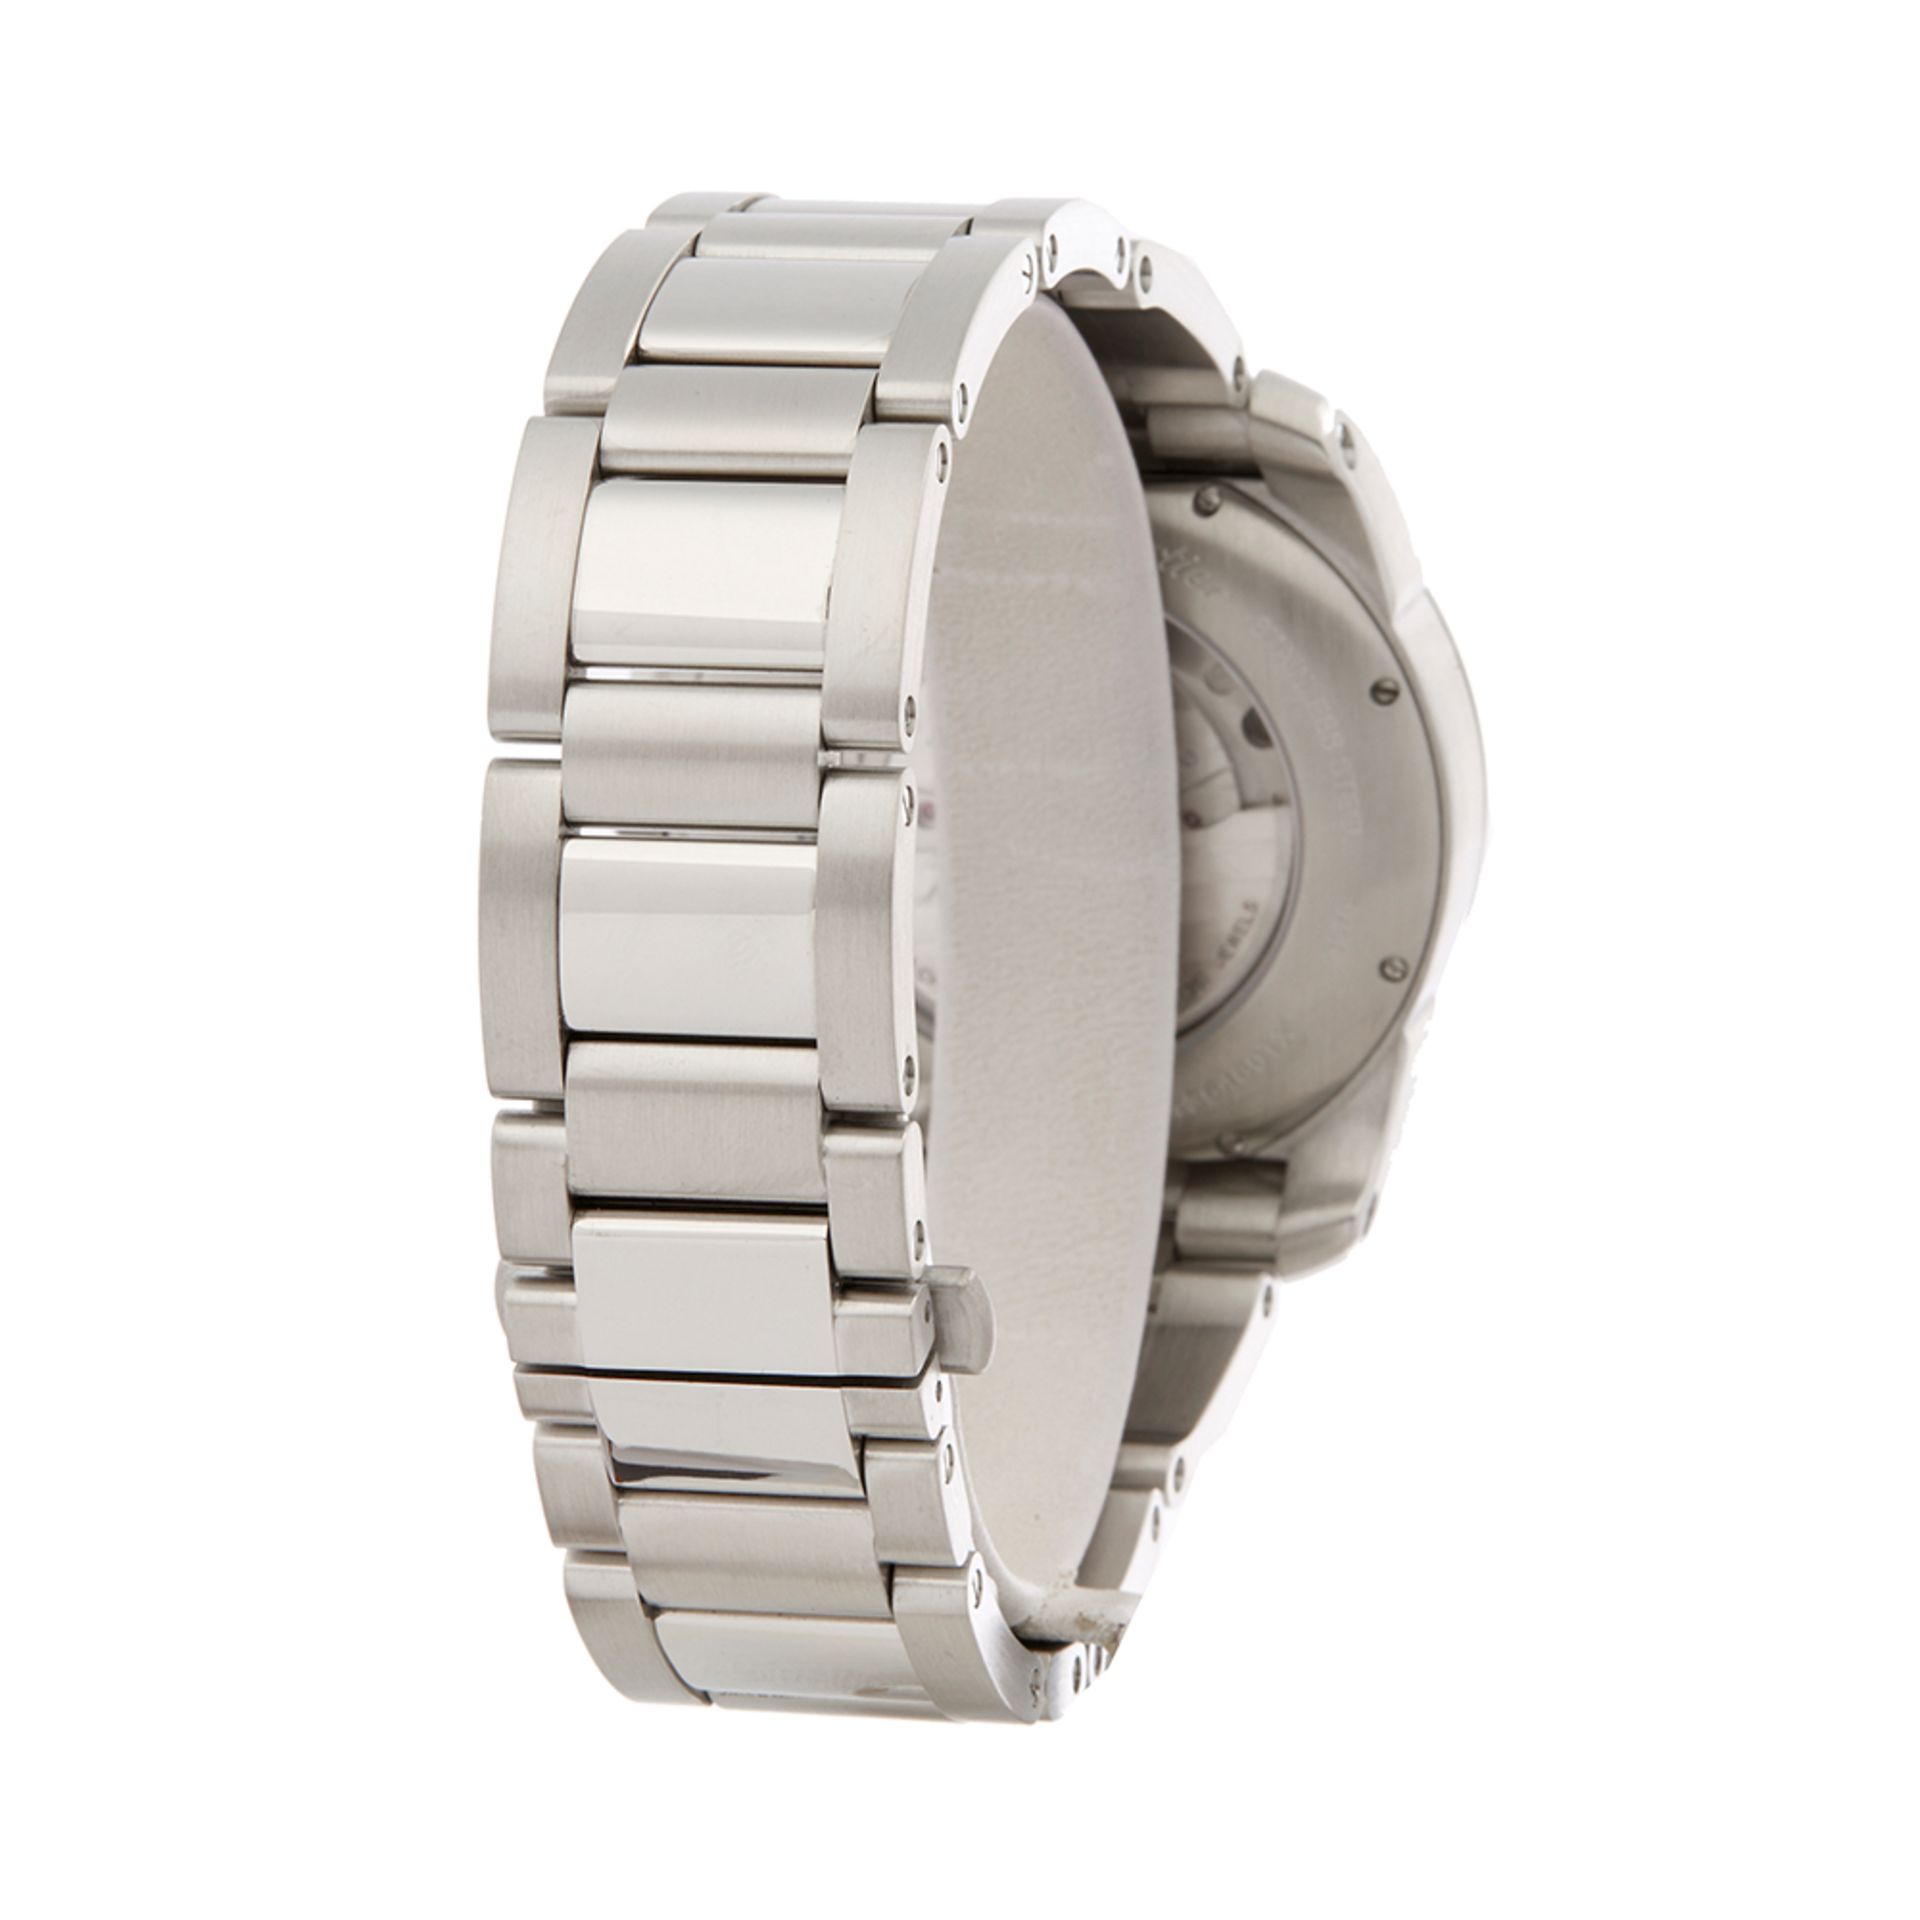 Cartier Calibre Stainless Steel - W7100061 - Image 4 of 6